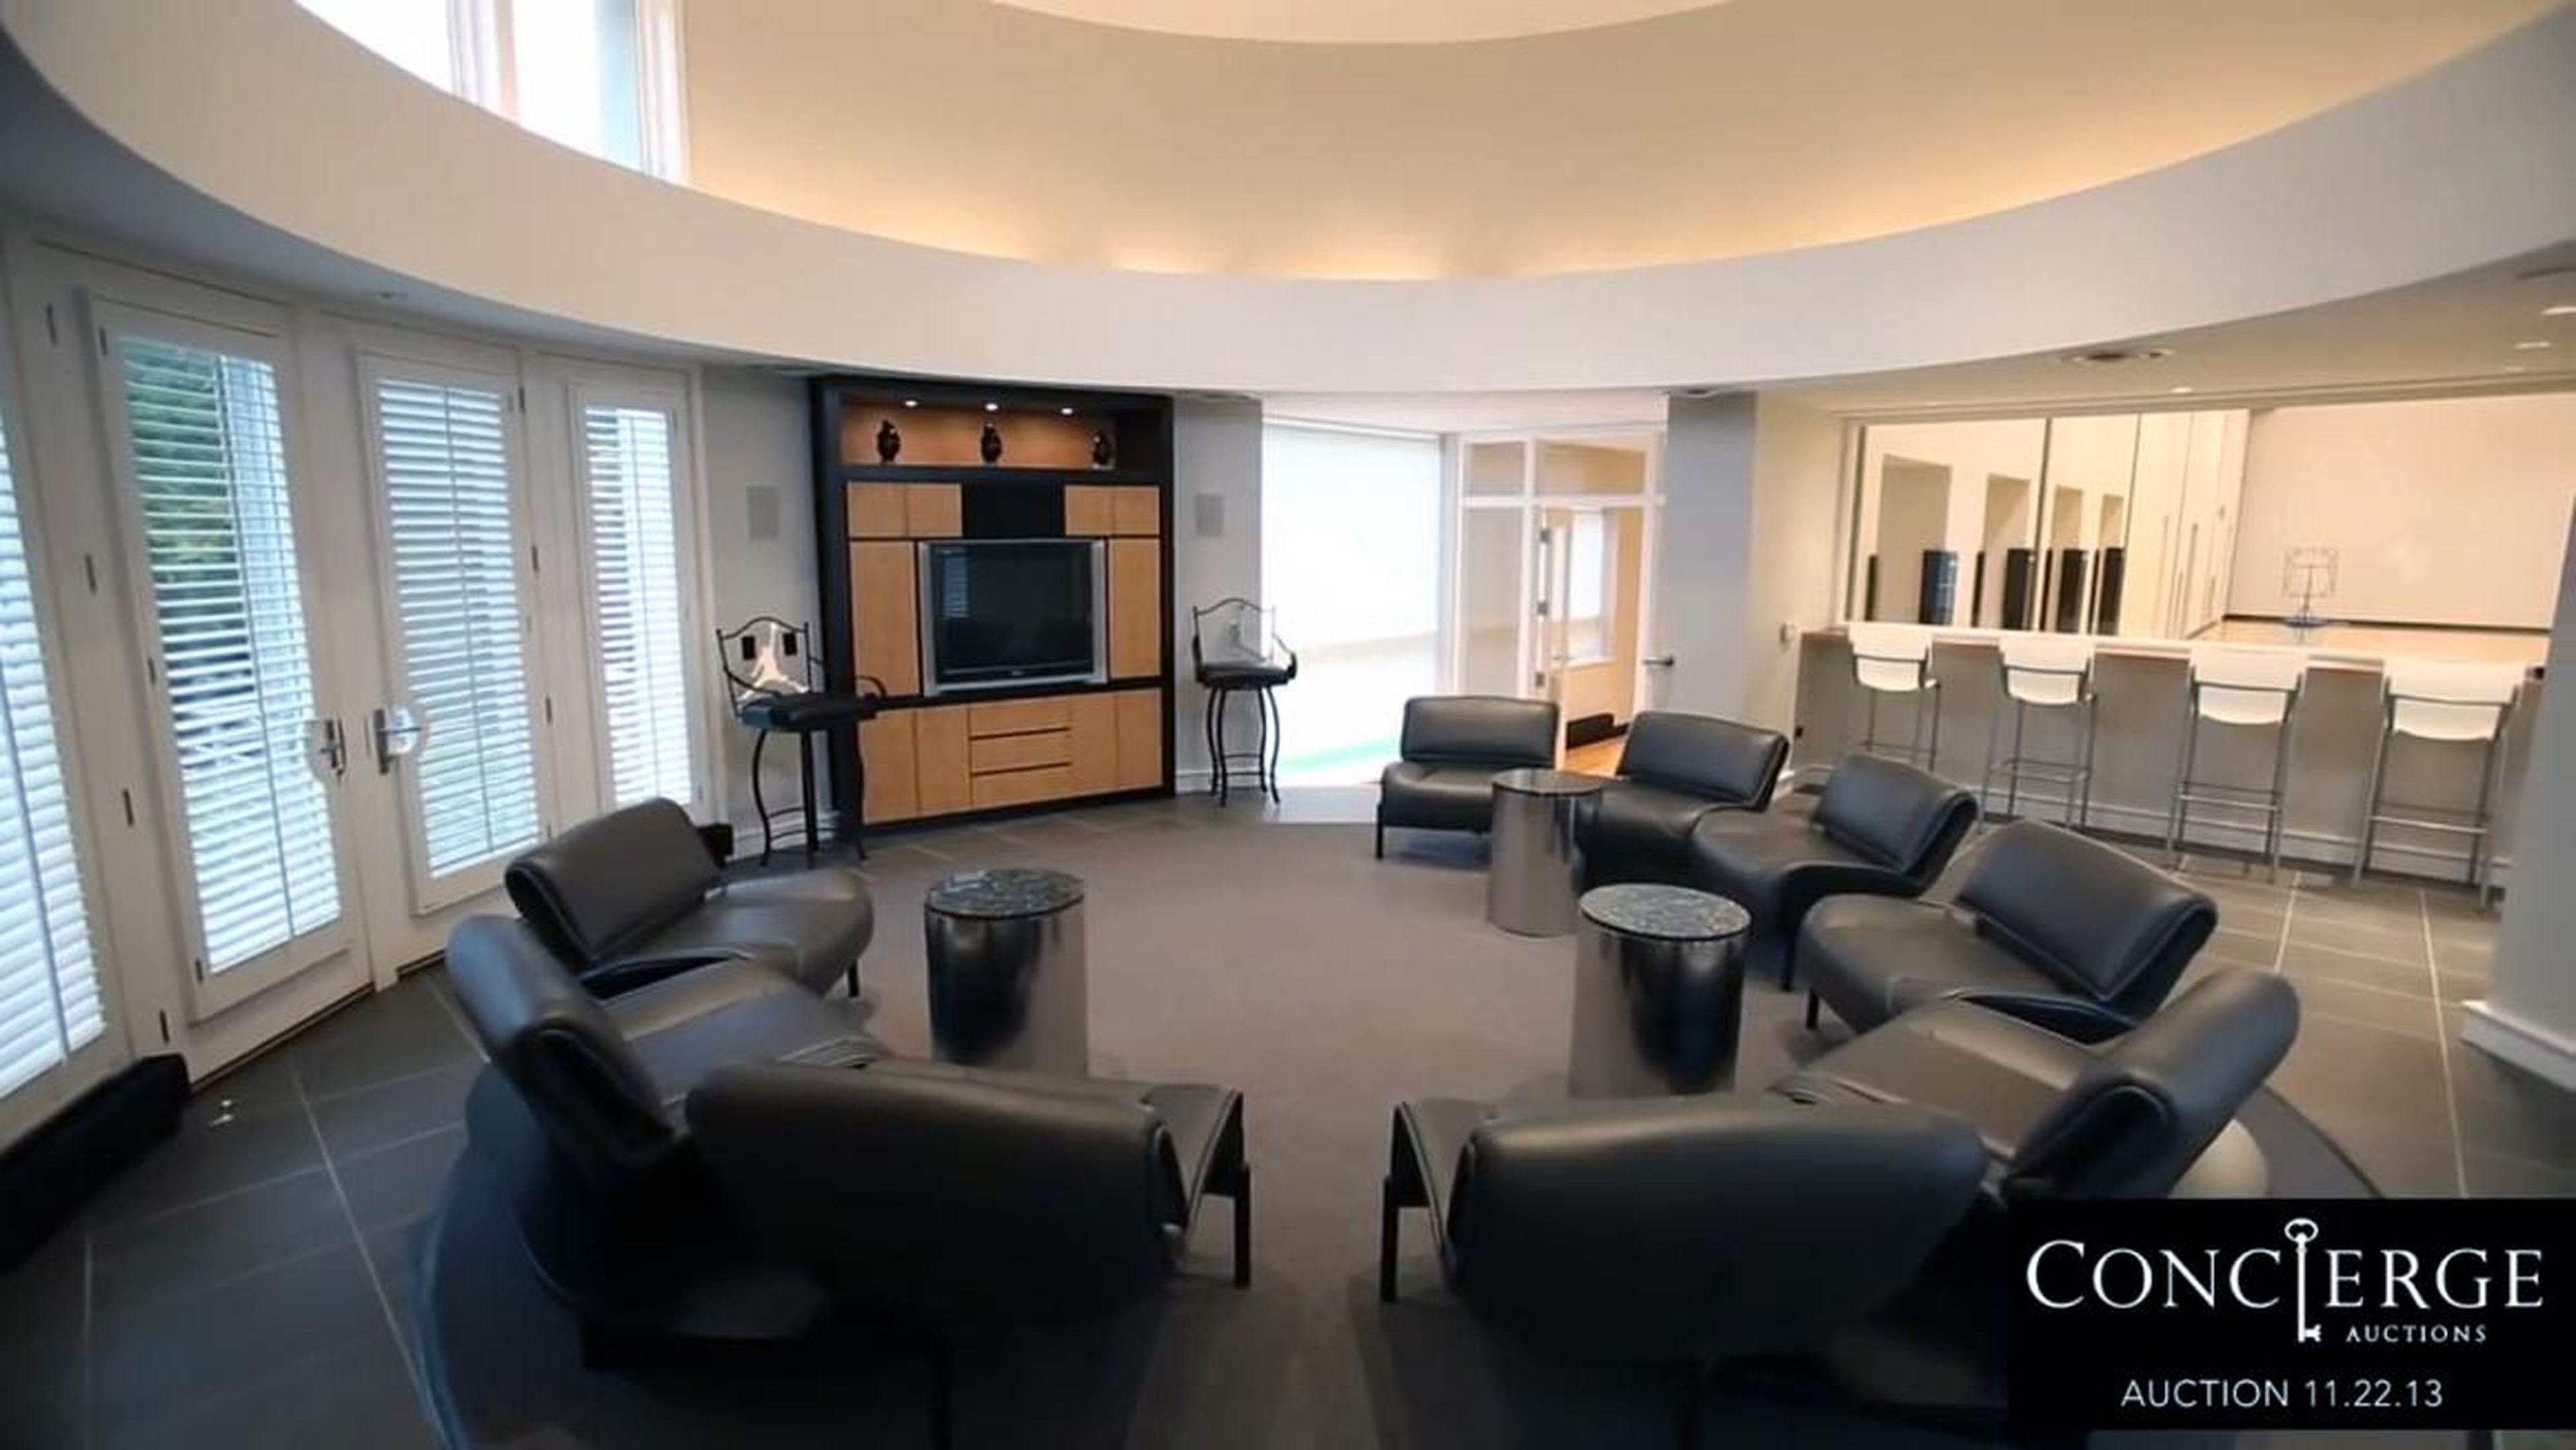 While guests wait for their turn on the court, they can hang out in this sitting area.